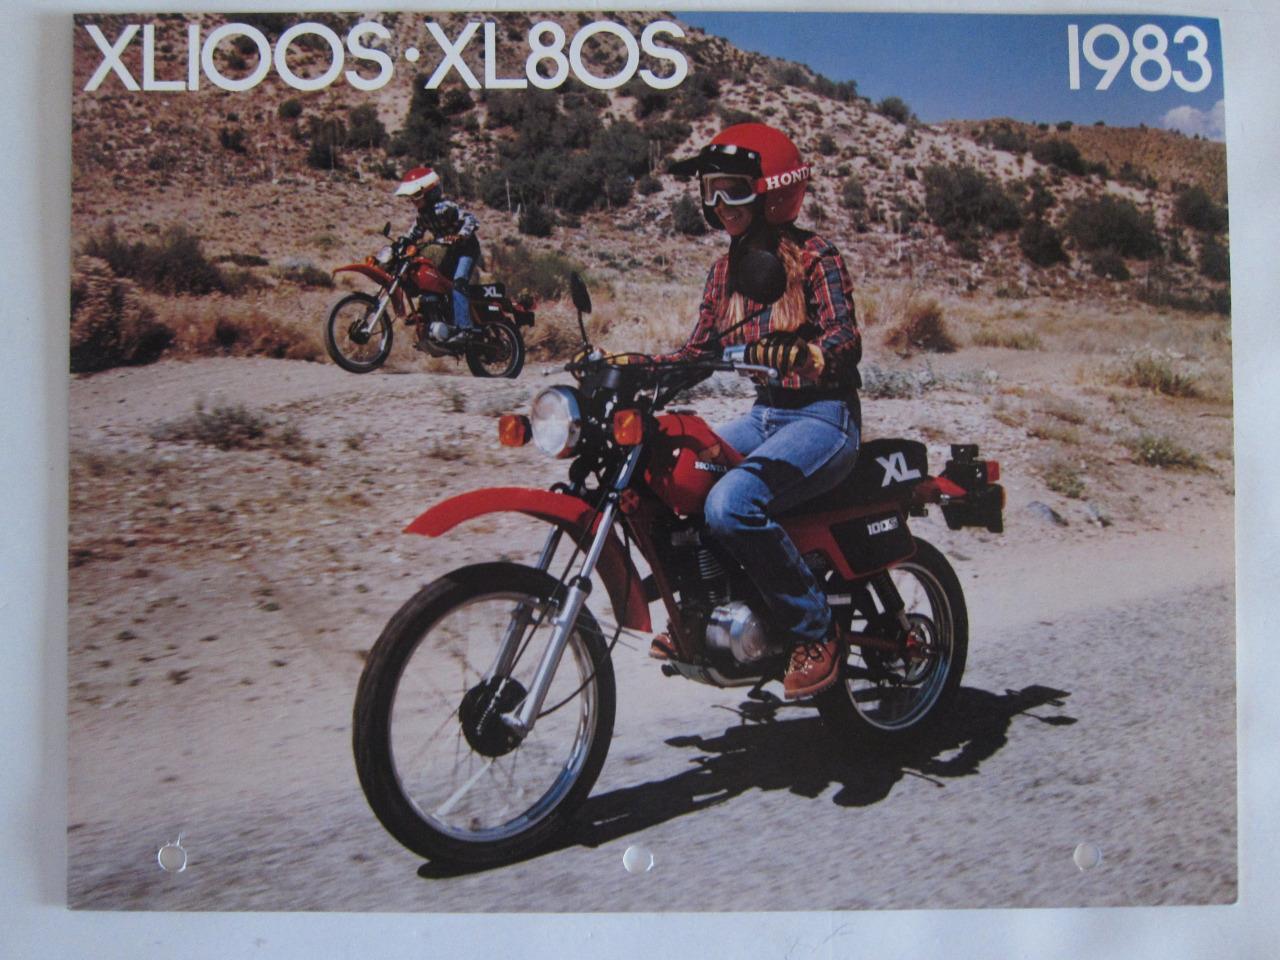 HONDA motorcycle brochure XL 100 S & XL 80S Uncirculated high quality color 1983